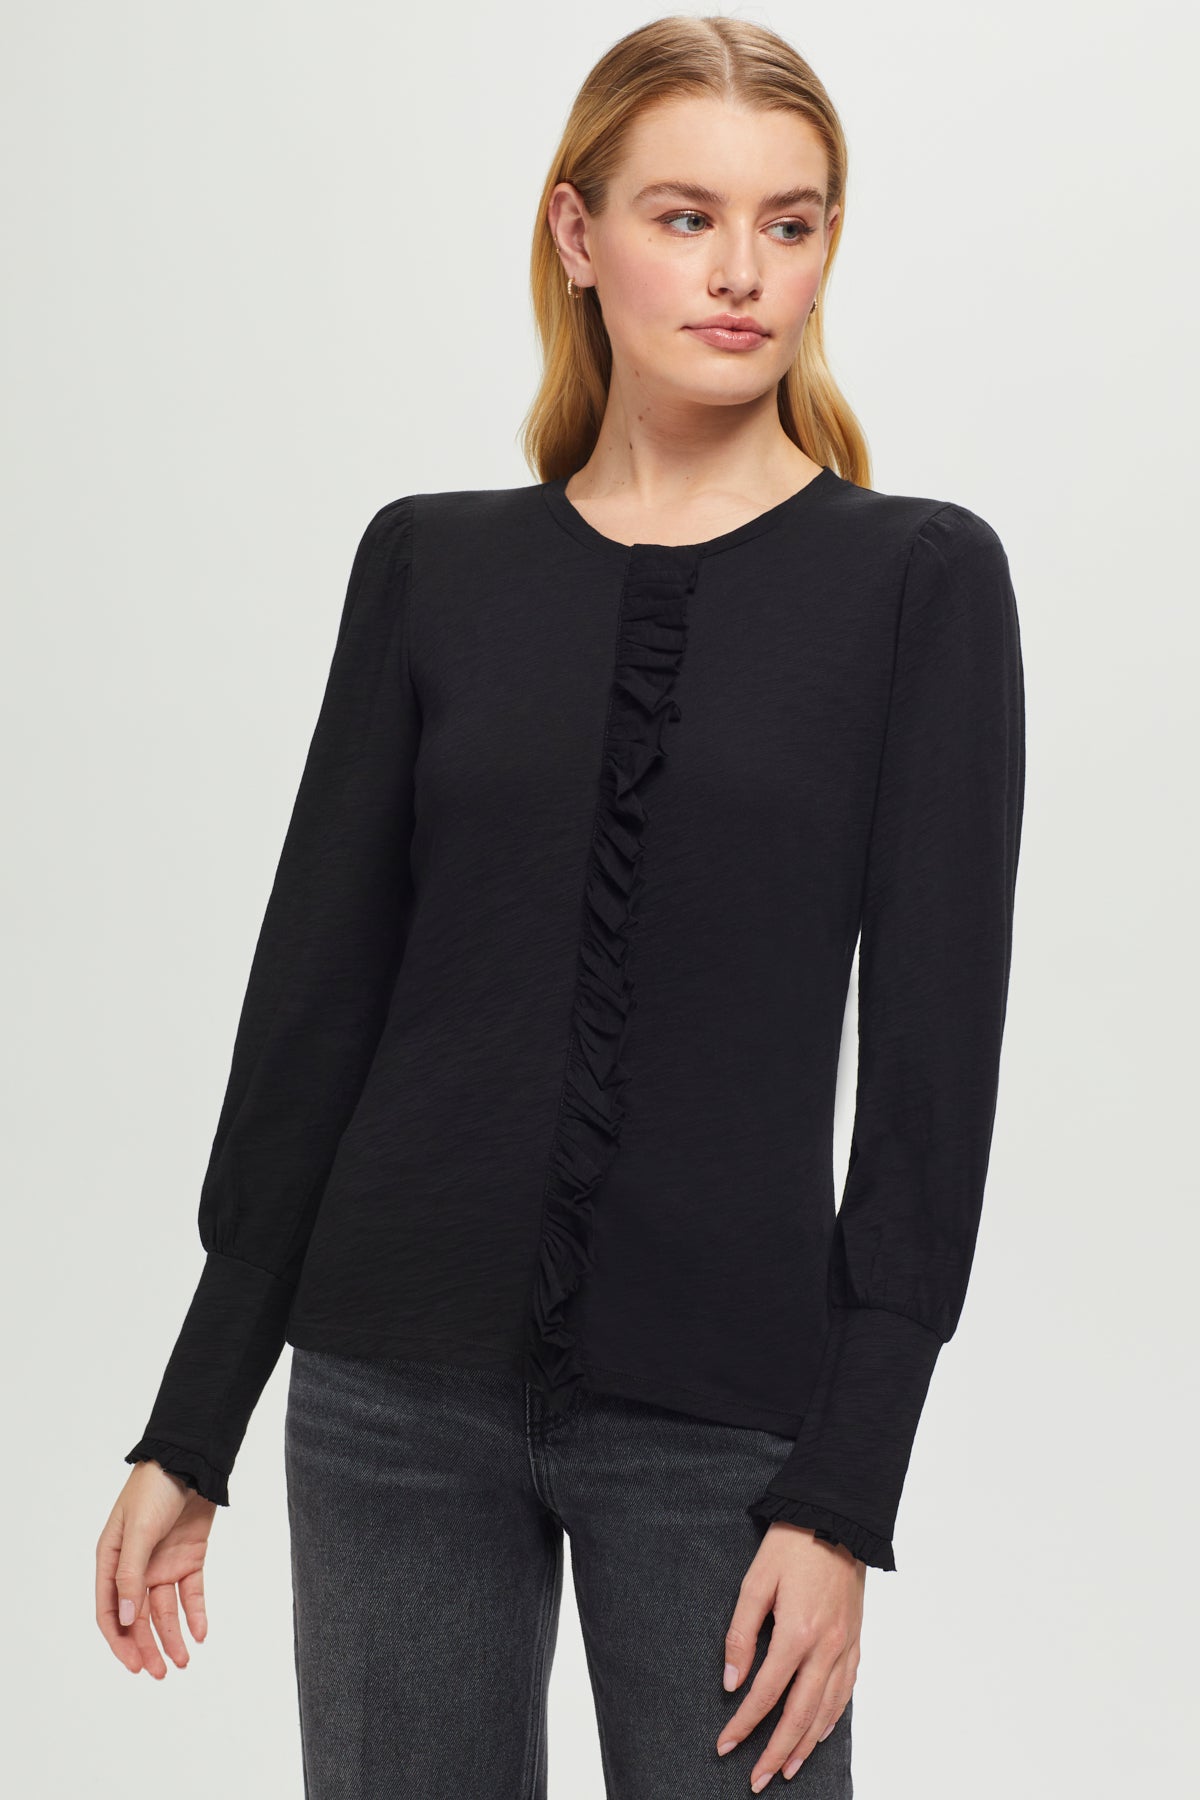 Anabella Ruffle Blouse - Goldie Lewinter